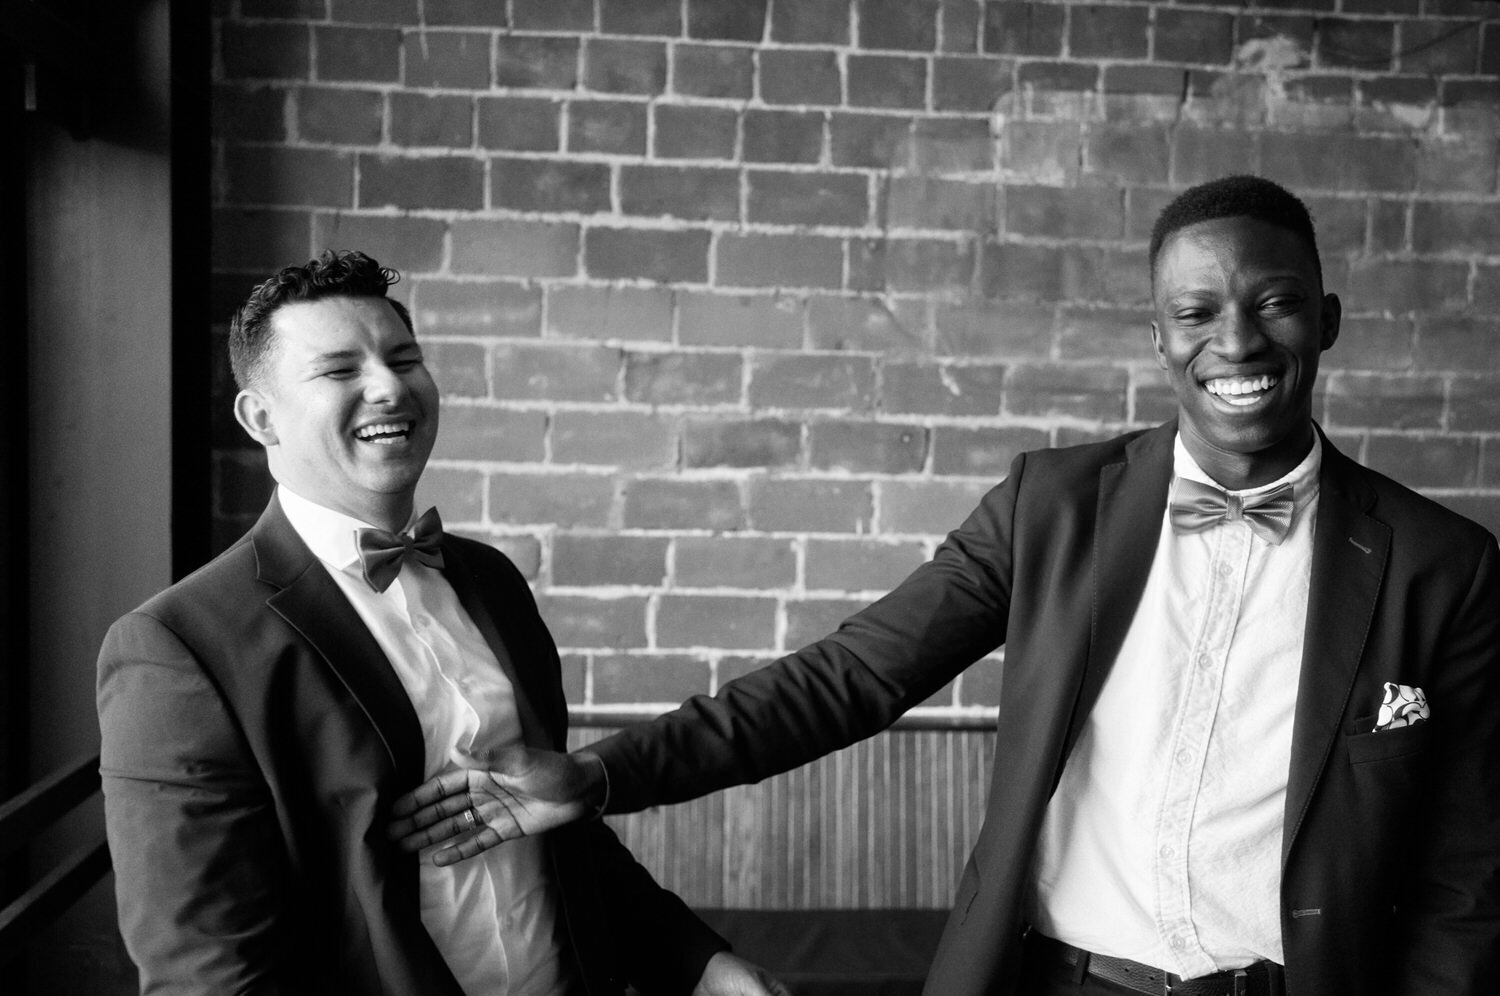 Two groomsmen laugh as they push each other